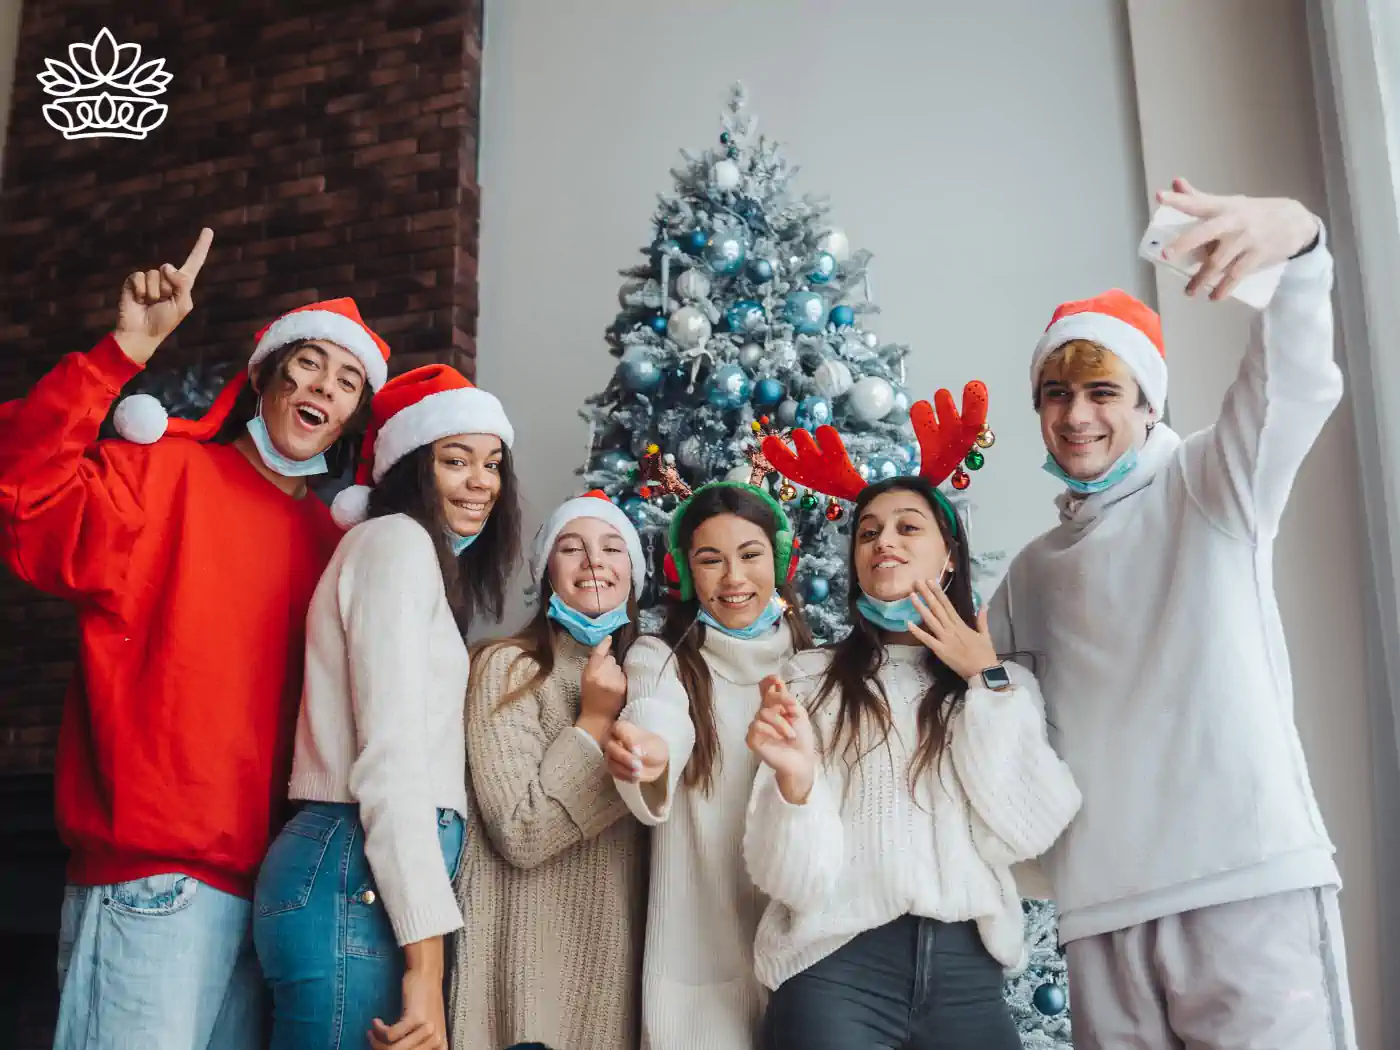 A group of friends celebrating the festive season with Santa hats and reindeer antlers, gathered around a beautifully decorated tree. Part of the Festive Season Flowers Collection. Delivered with Heart by Fabulous Flowers and Gifts.